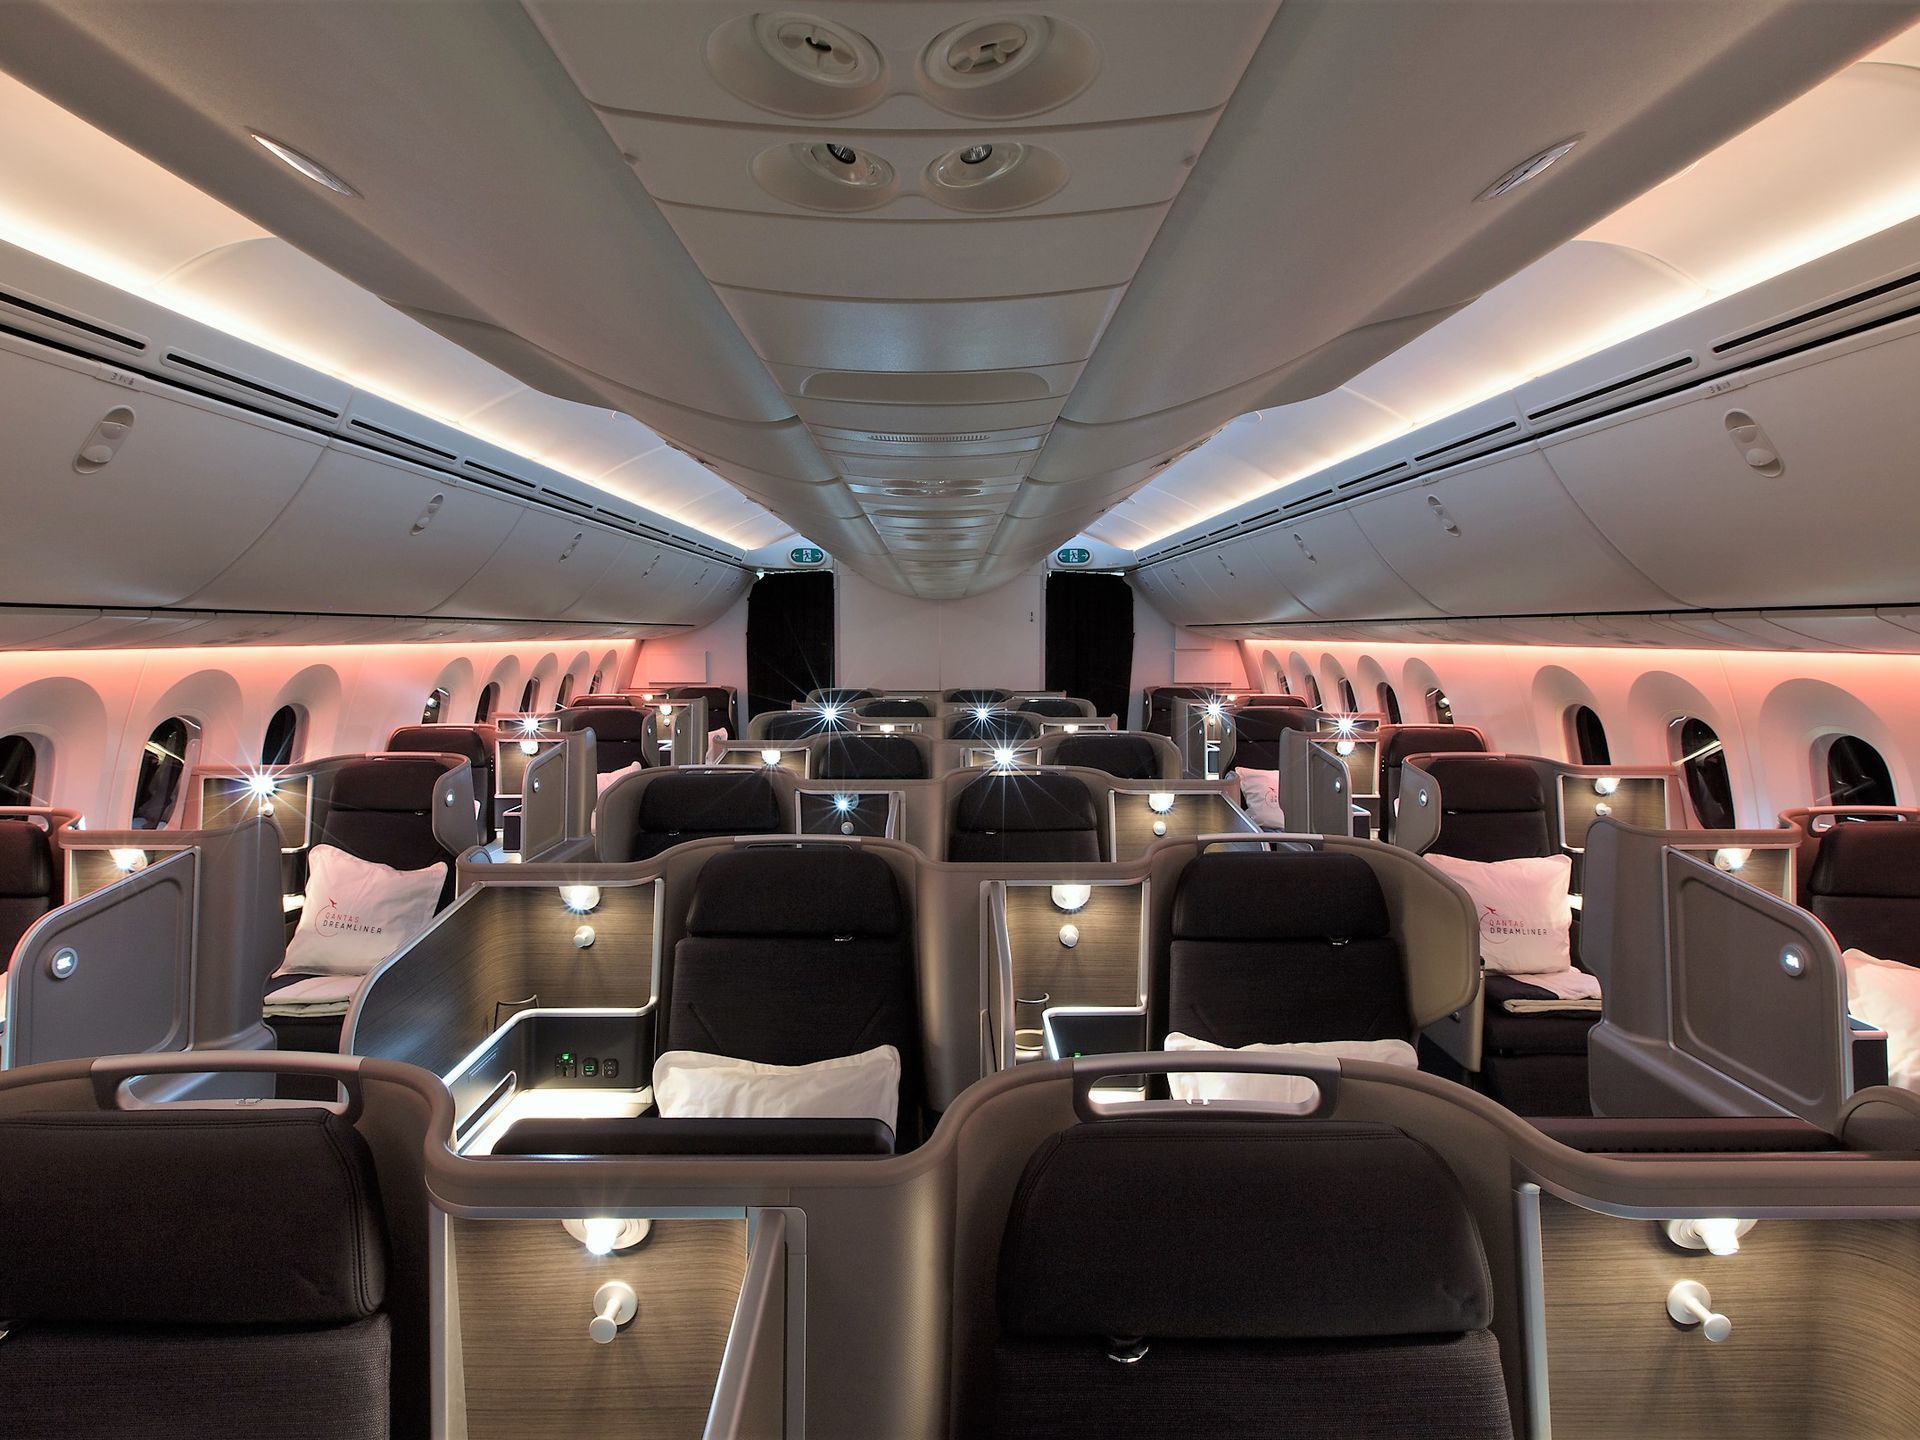 How to find the cheapest Qantas Business Class fare?